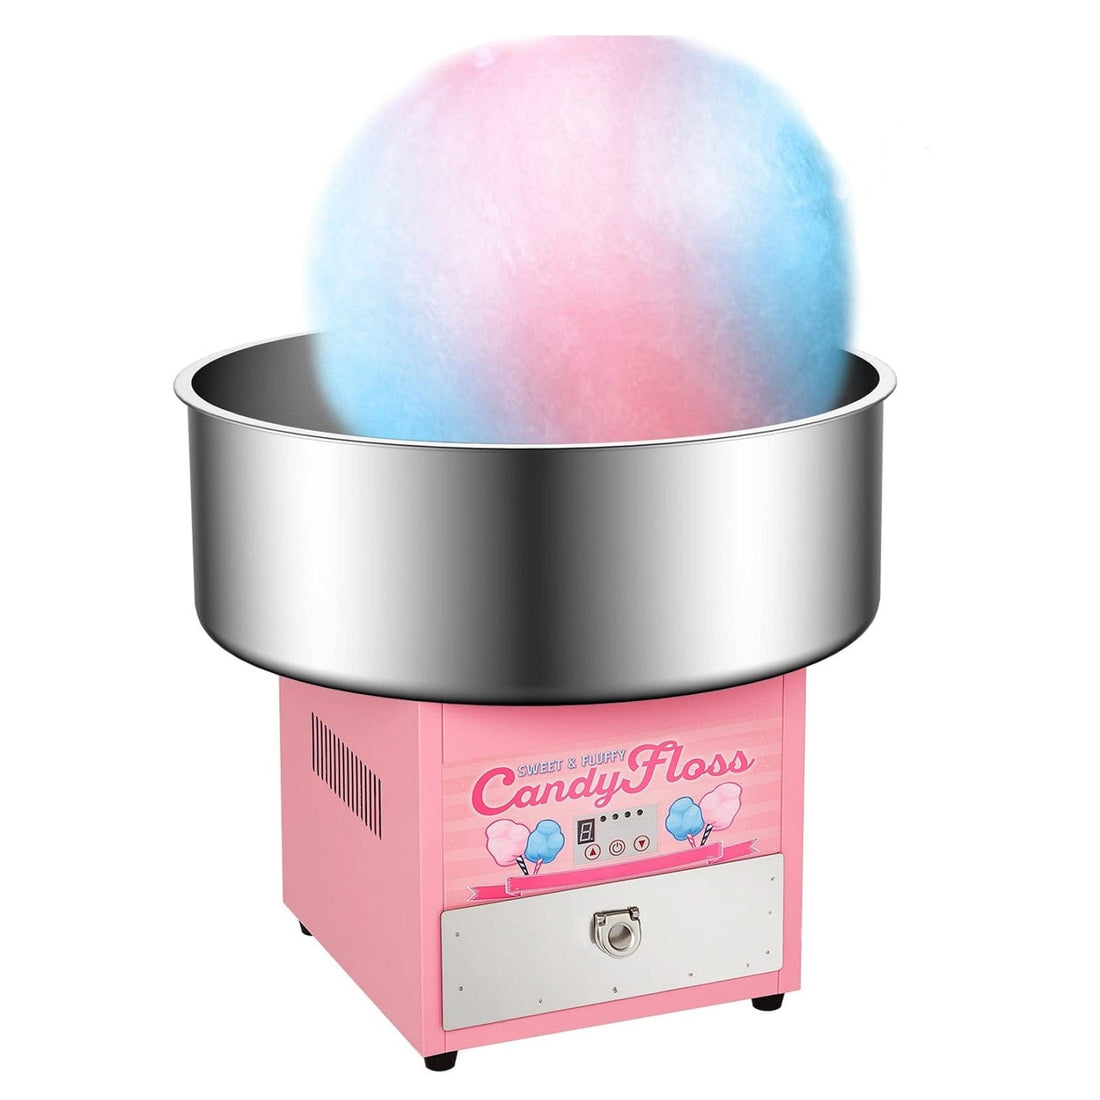 20" Commercial Cotton Candy Maker, Electric with Steel Bowl